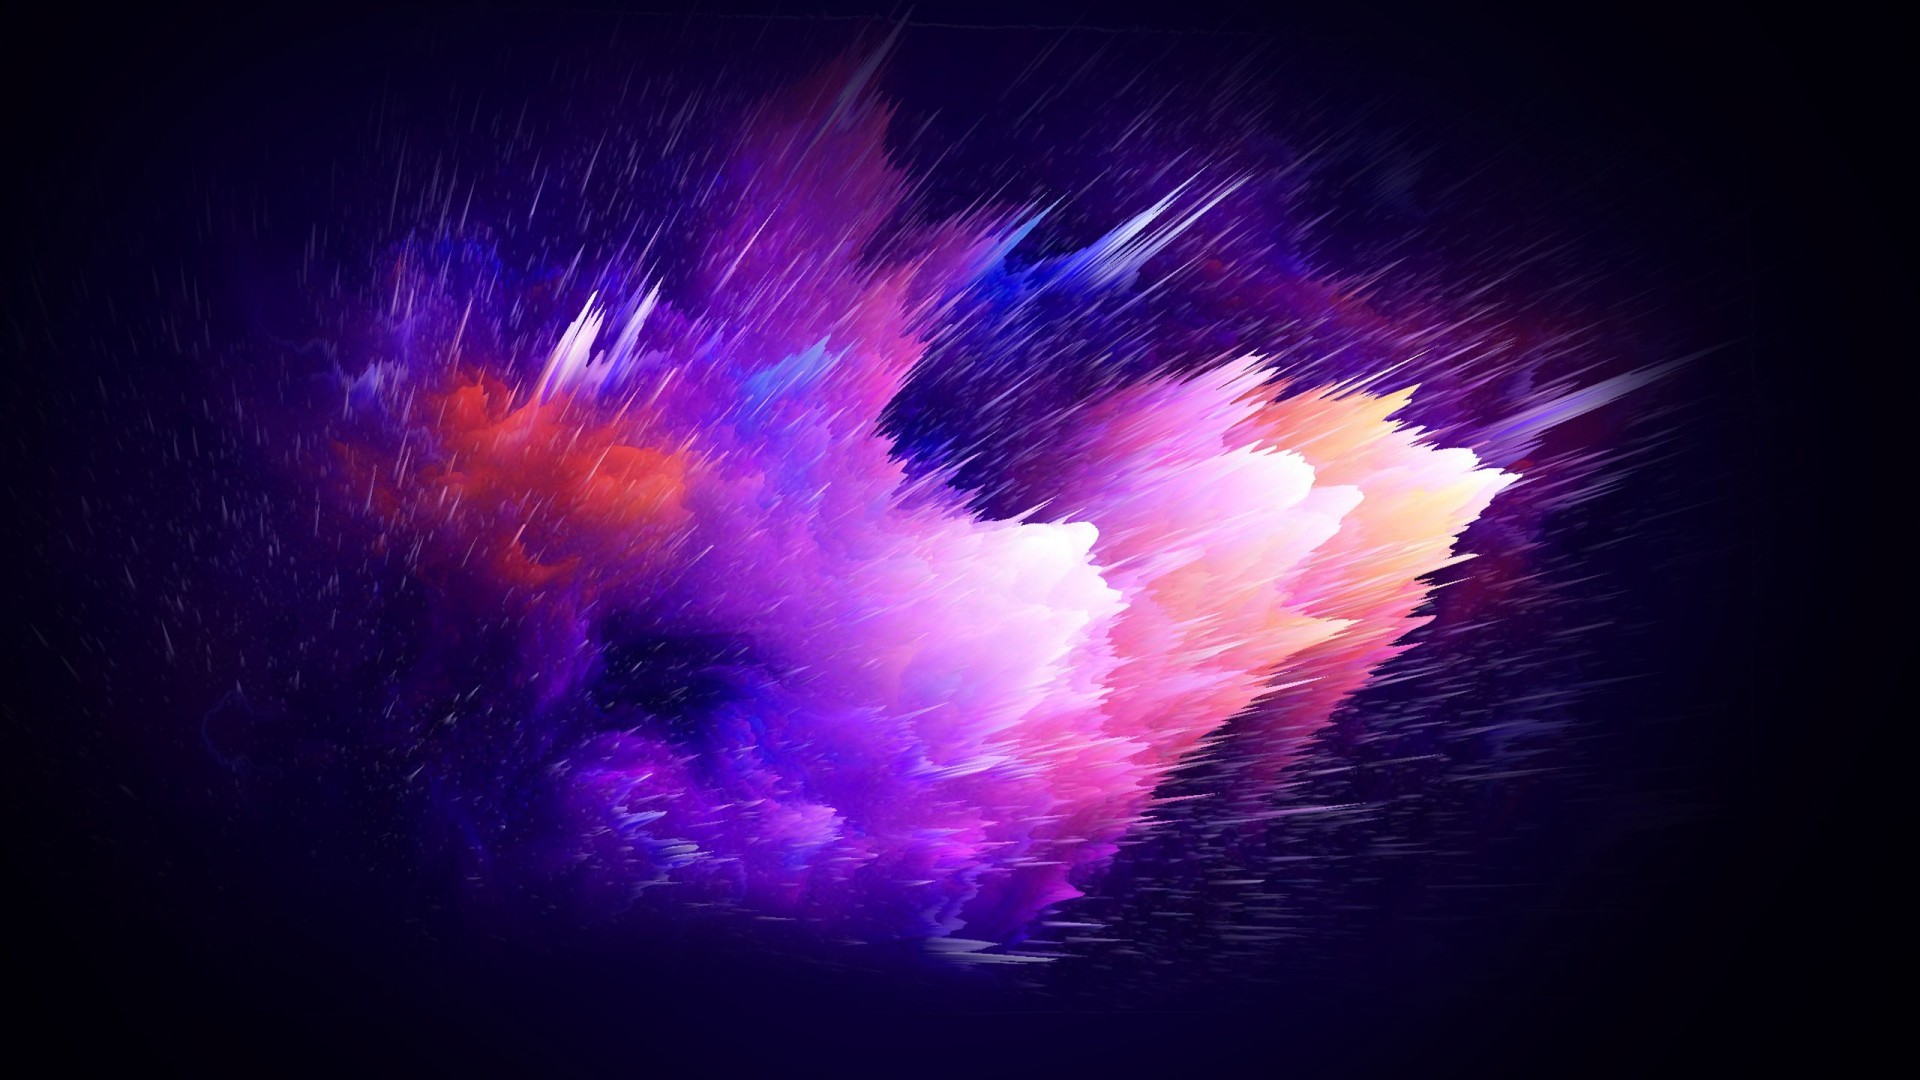 Color Explosion, Particles, Cloud - Galaxy Oppo A7 - HD Wallpaper 